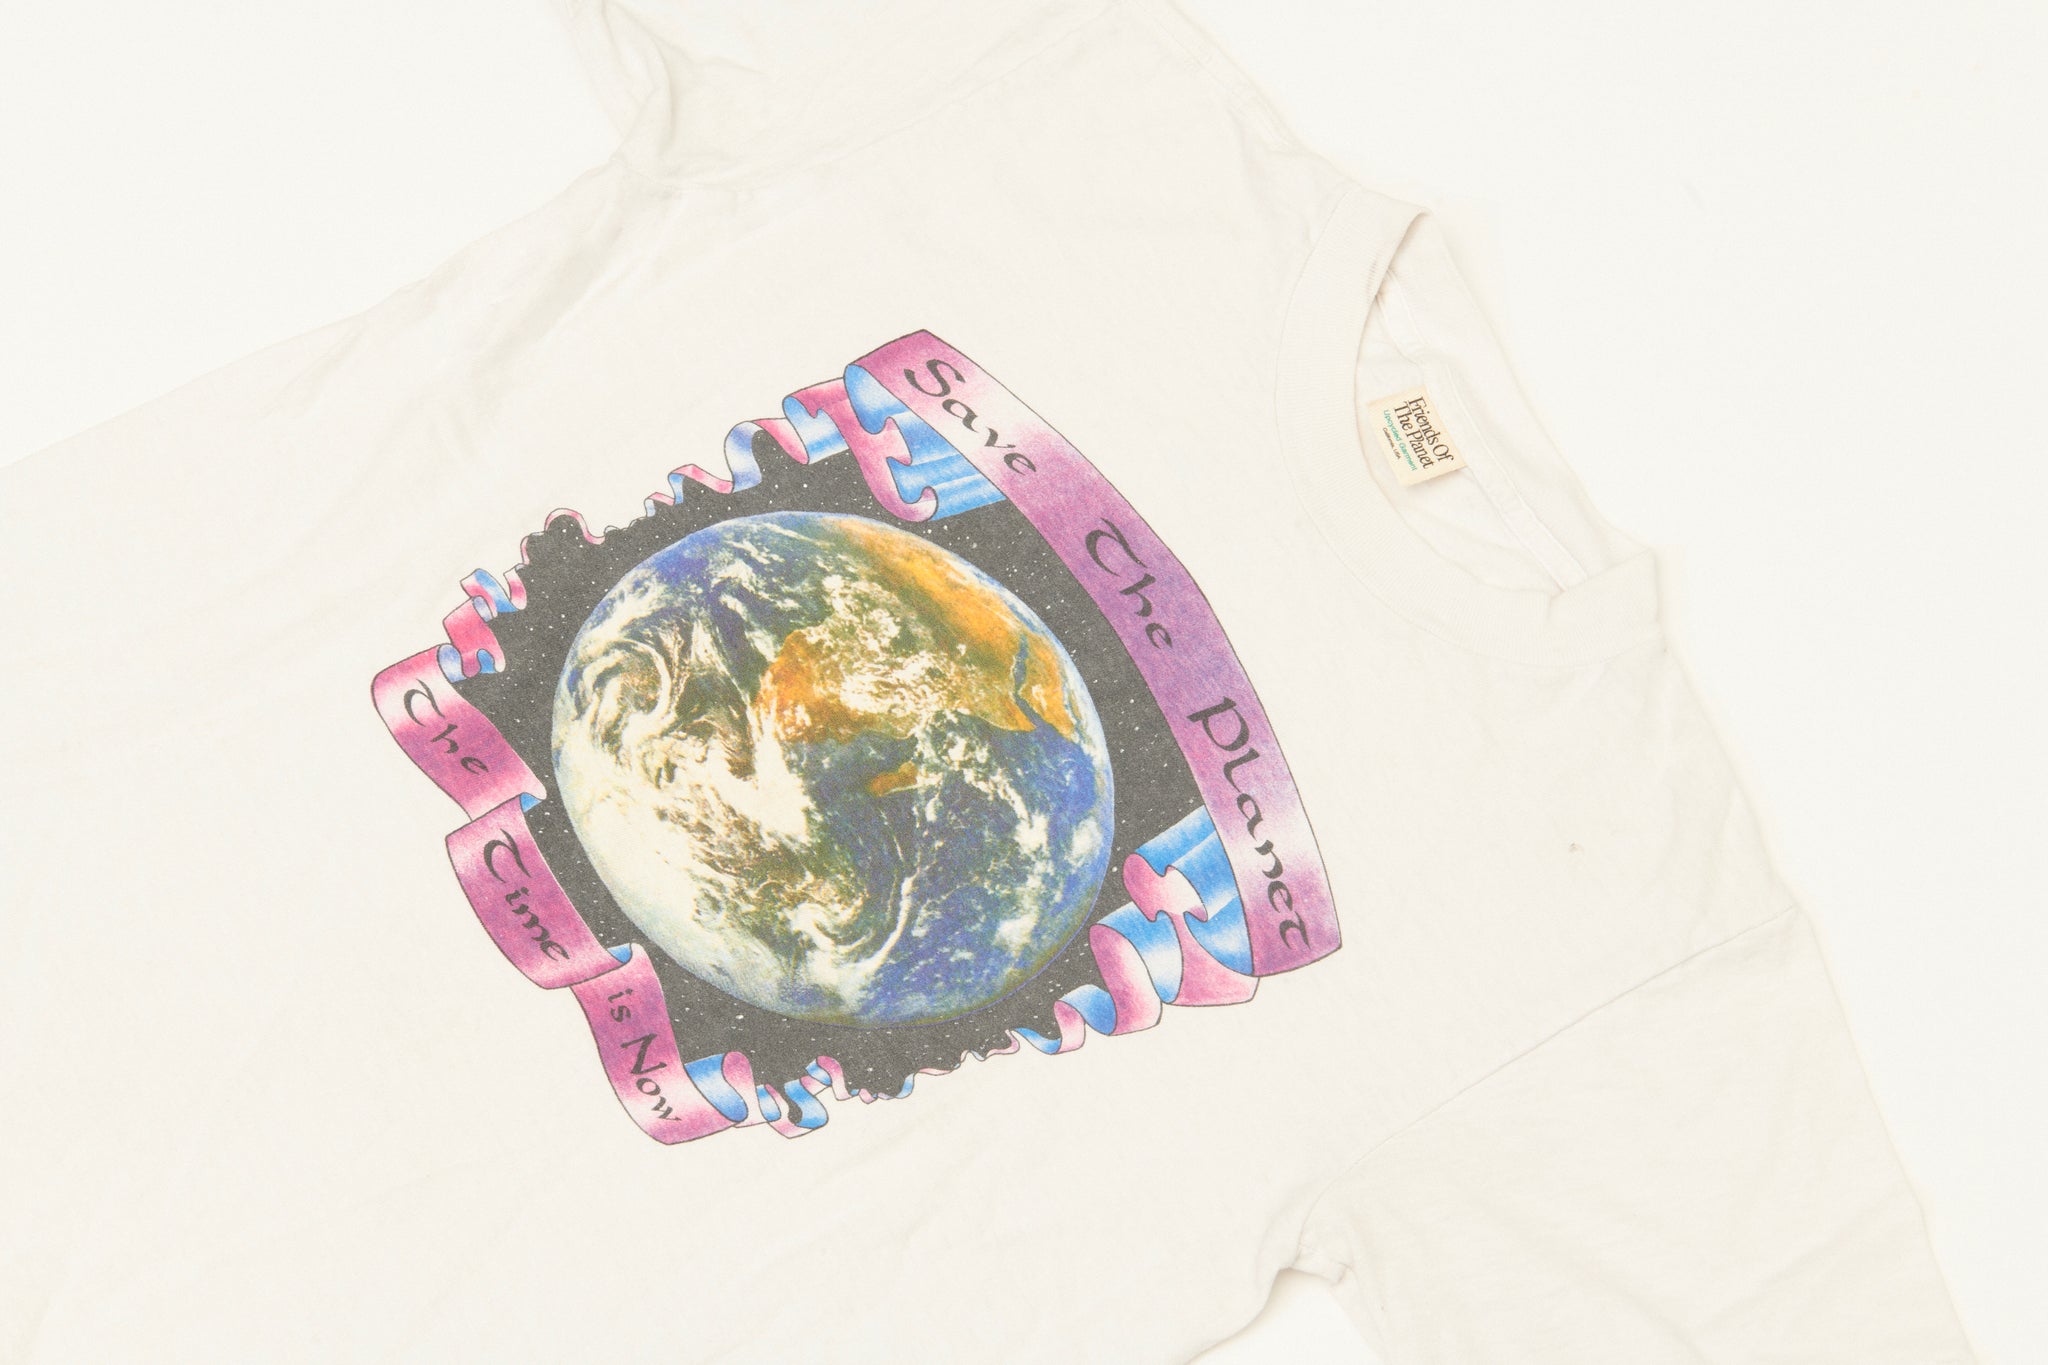 Upcycled Tee #2 ~ "The Time Is Now" ~ Size S